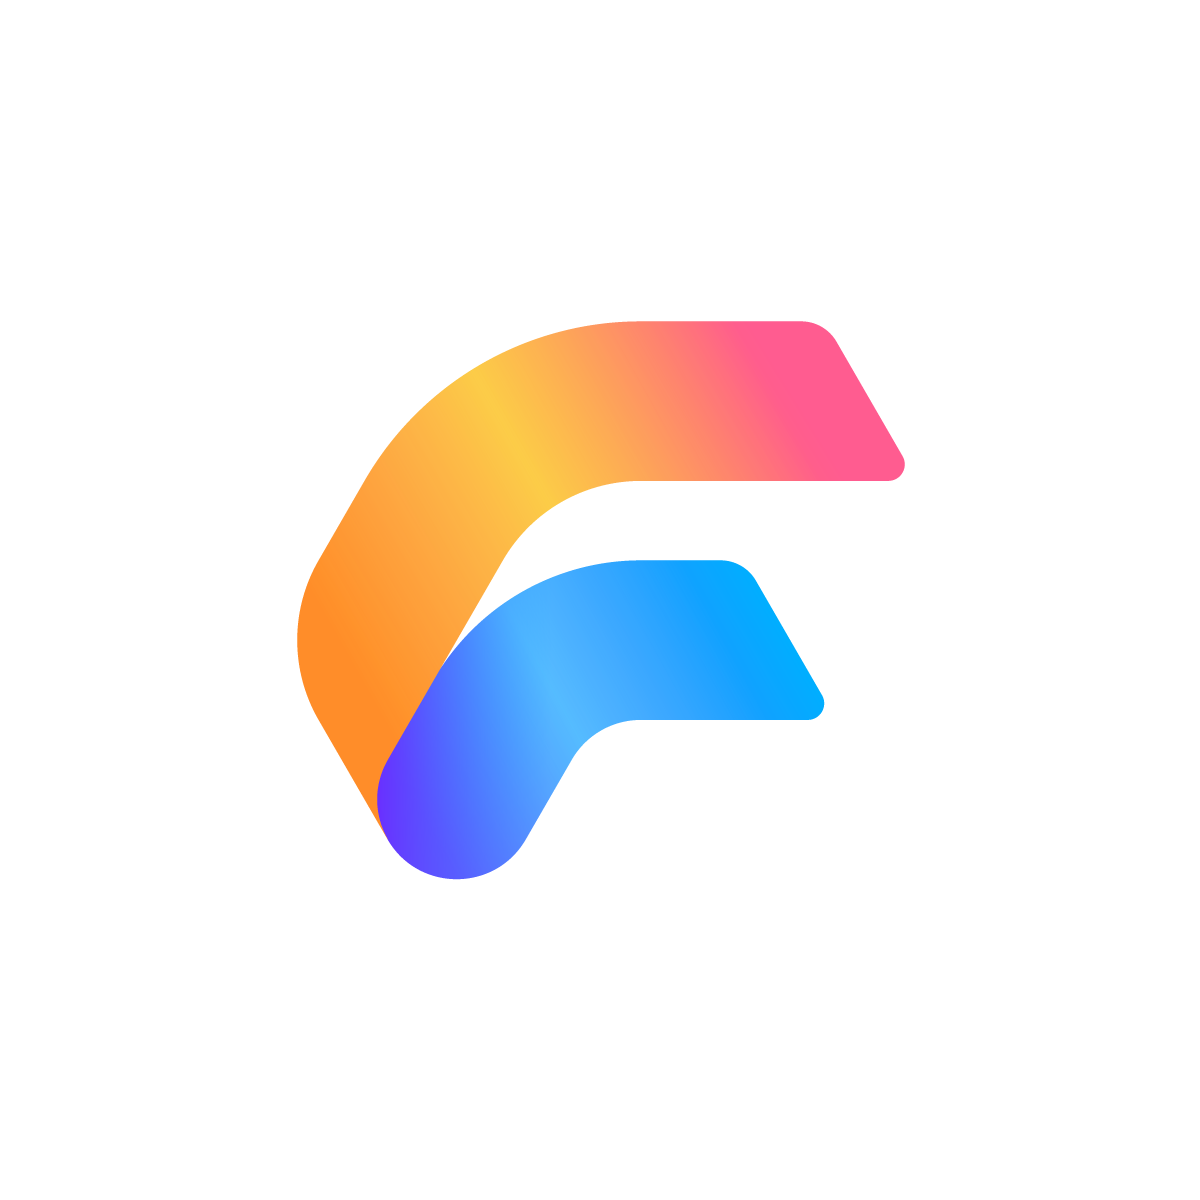 Dive into our Flow F Logo – a colorful and geometric marvel with a gradient and fold effect, representing dynamic energy